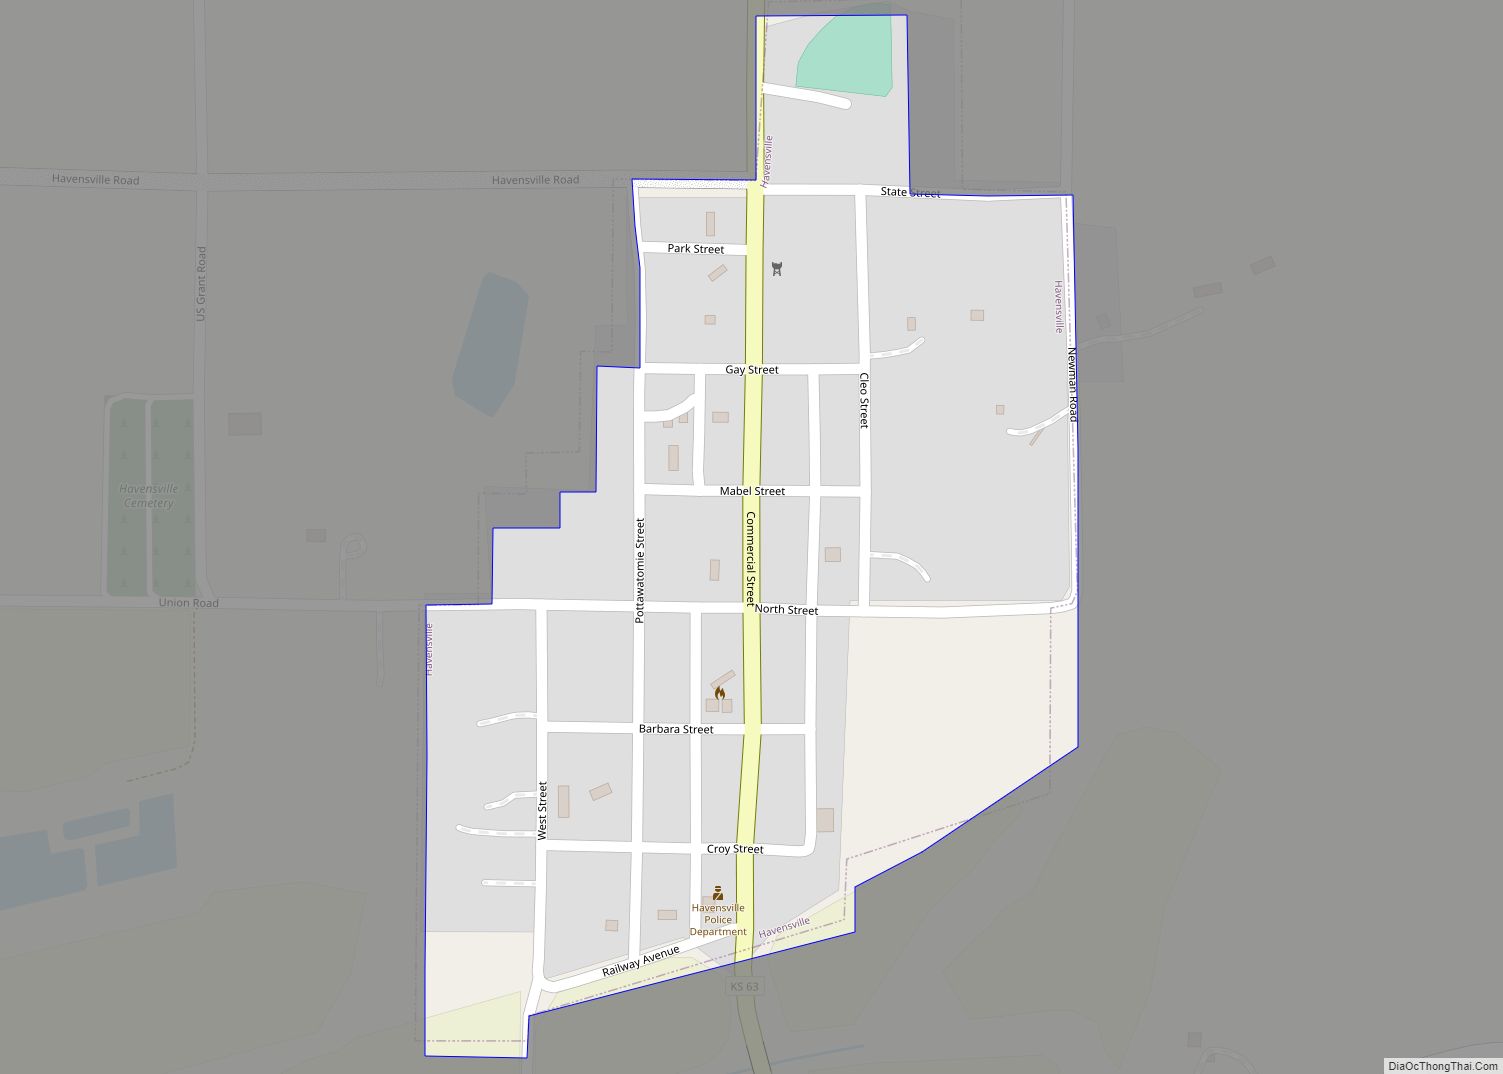 Map of Havensville city